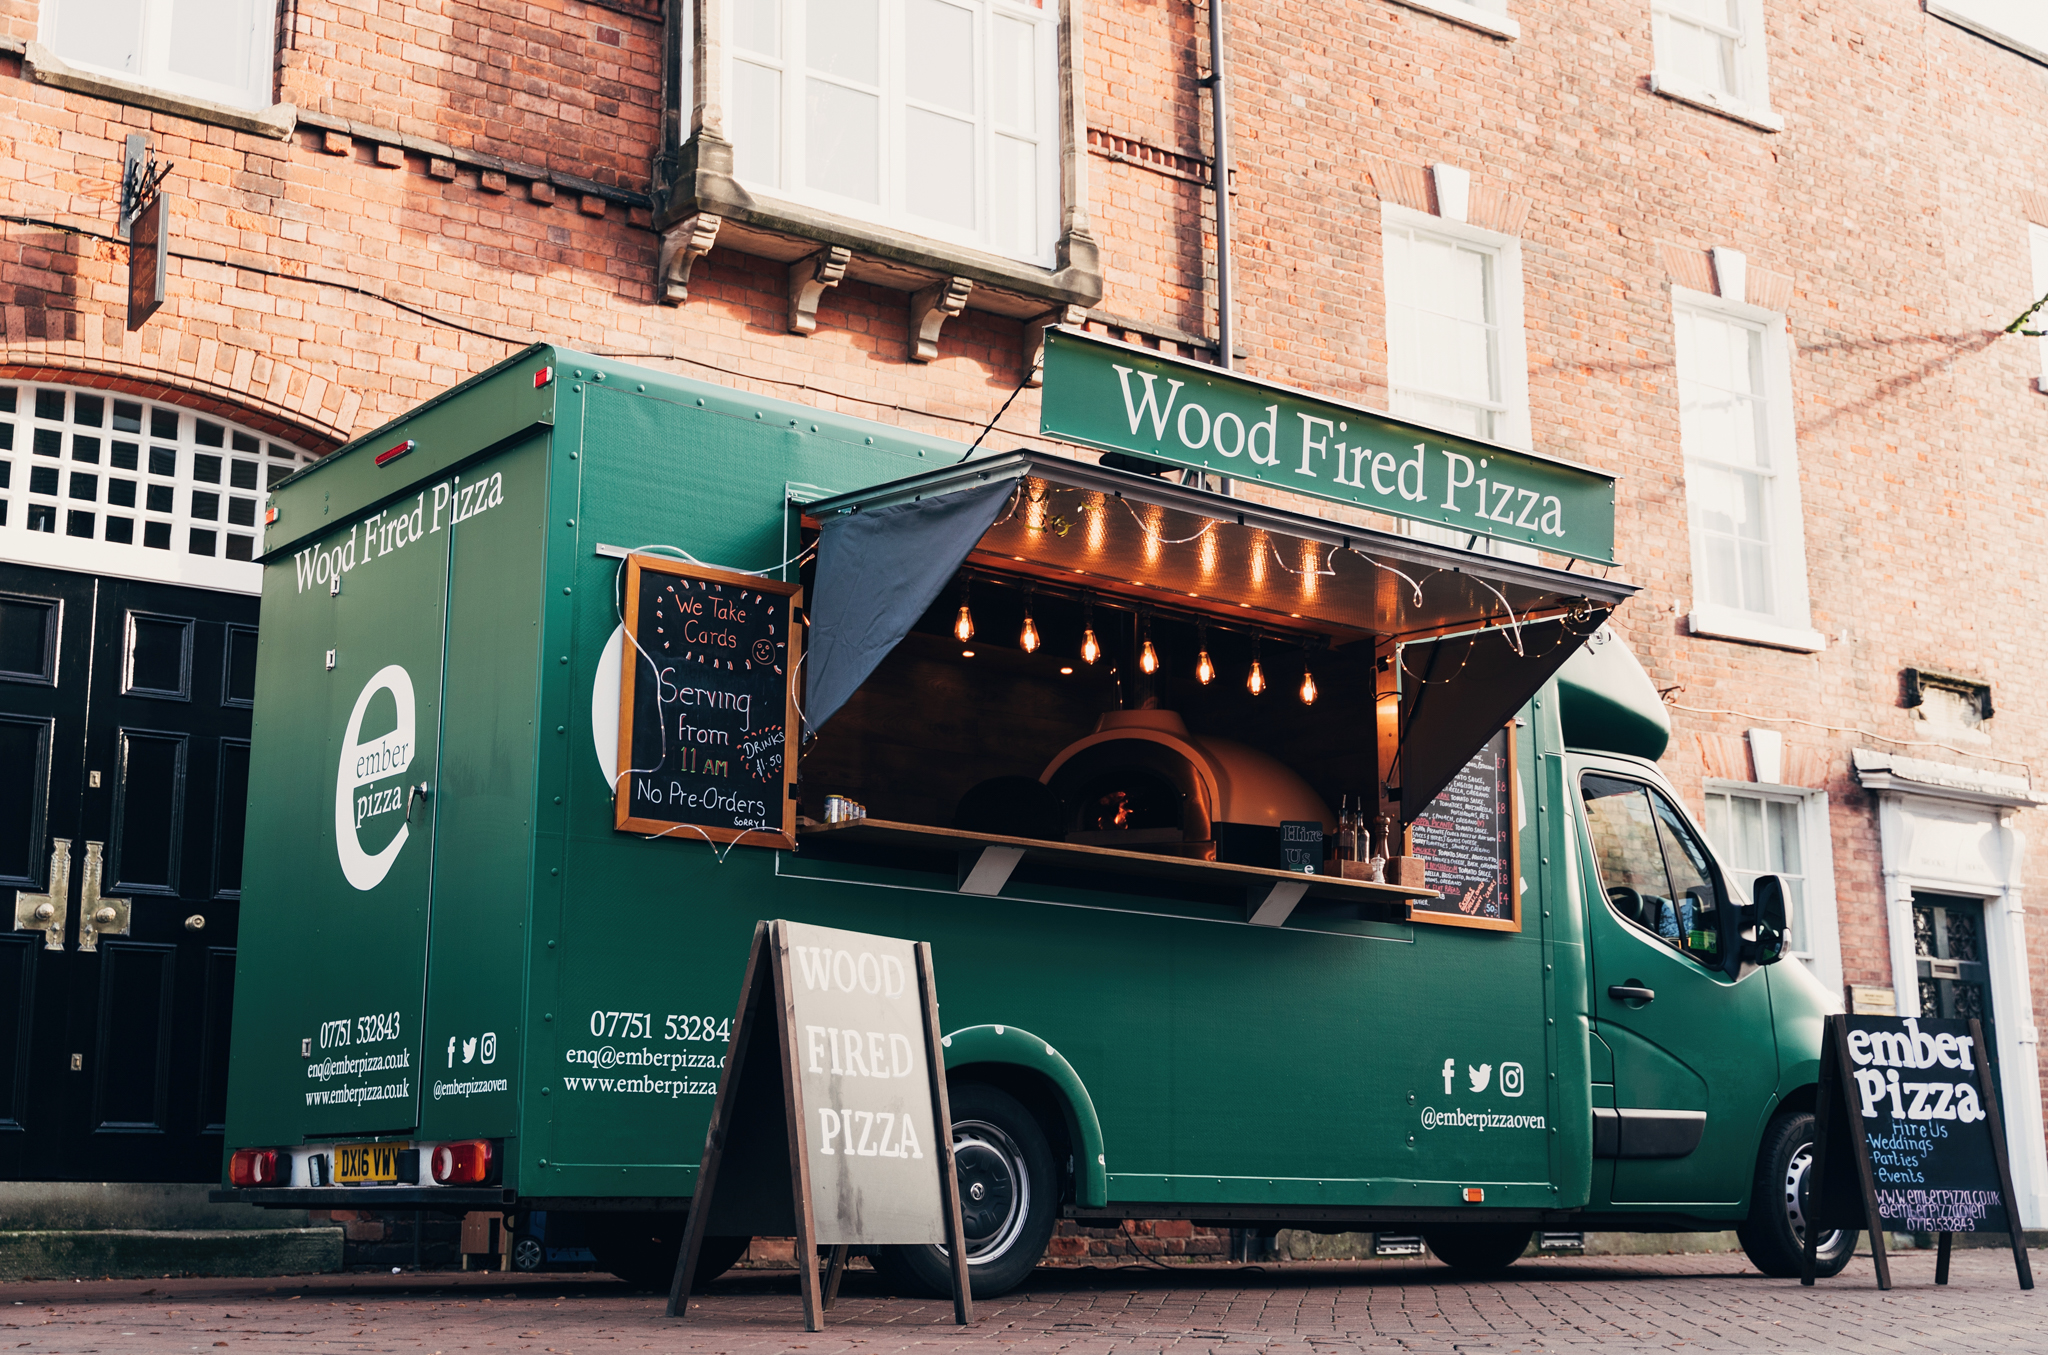 Wood Fired Pizza Vehicle - Staffordshire